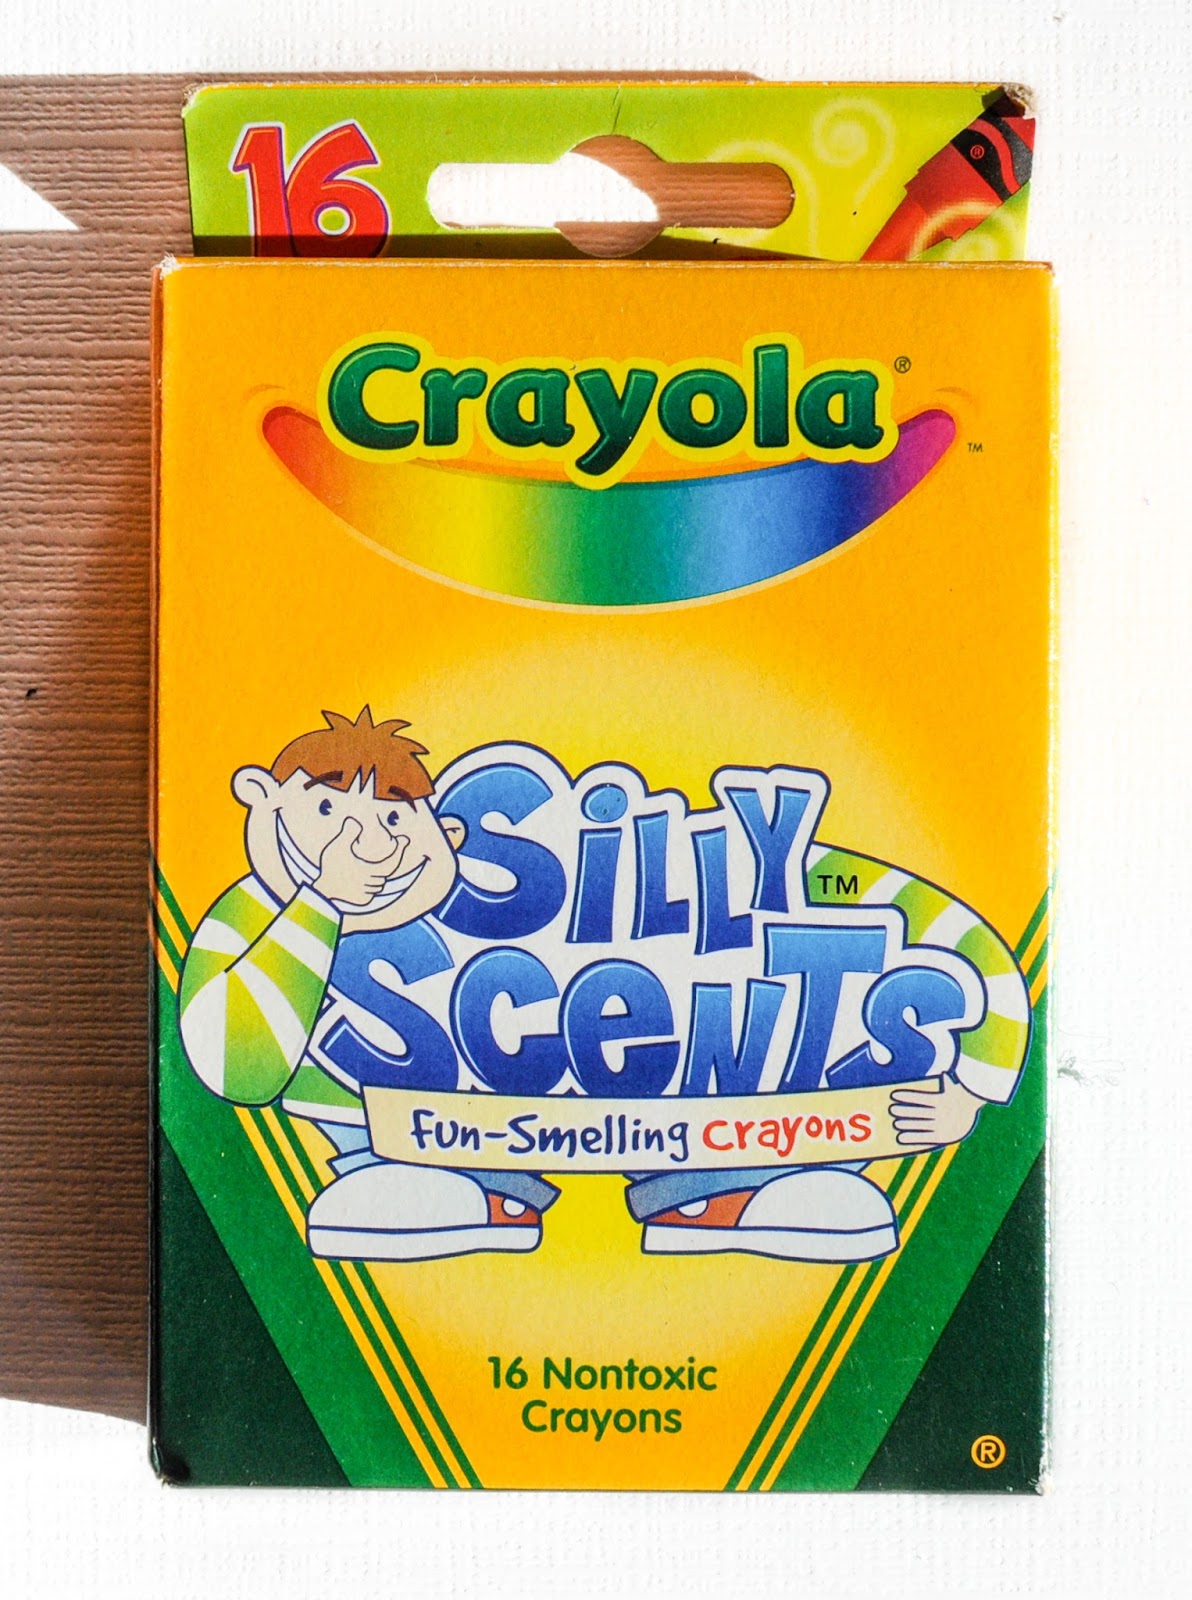 Crayola Silly Scents Colored Pencils and Crayons